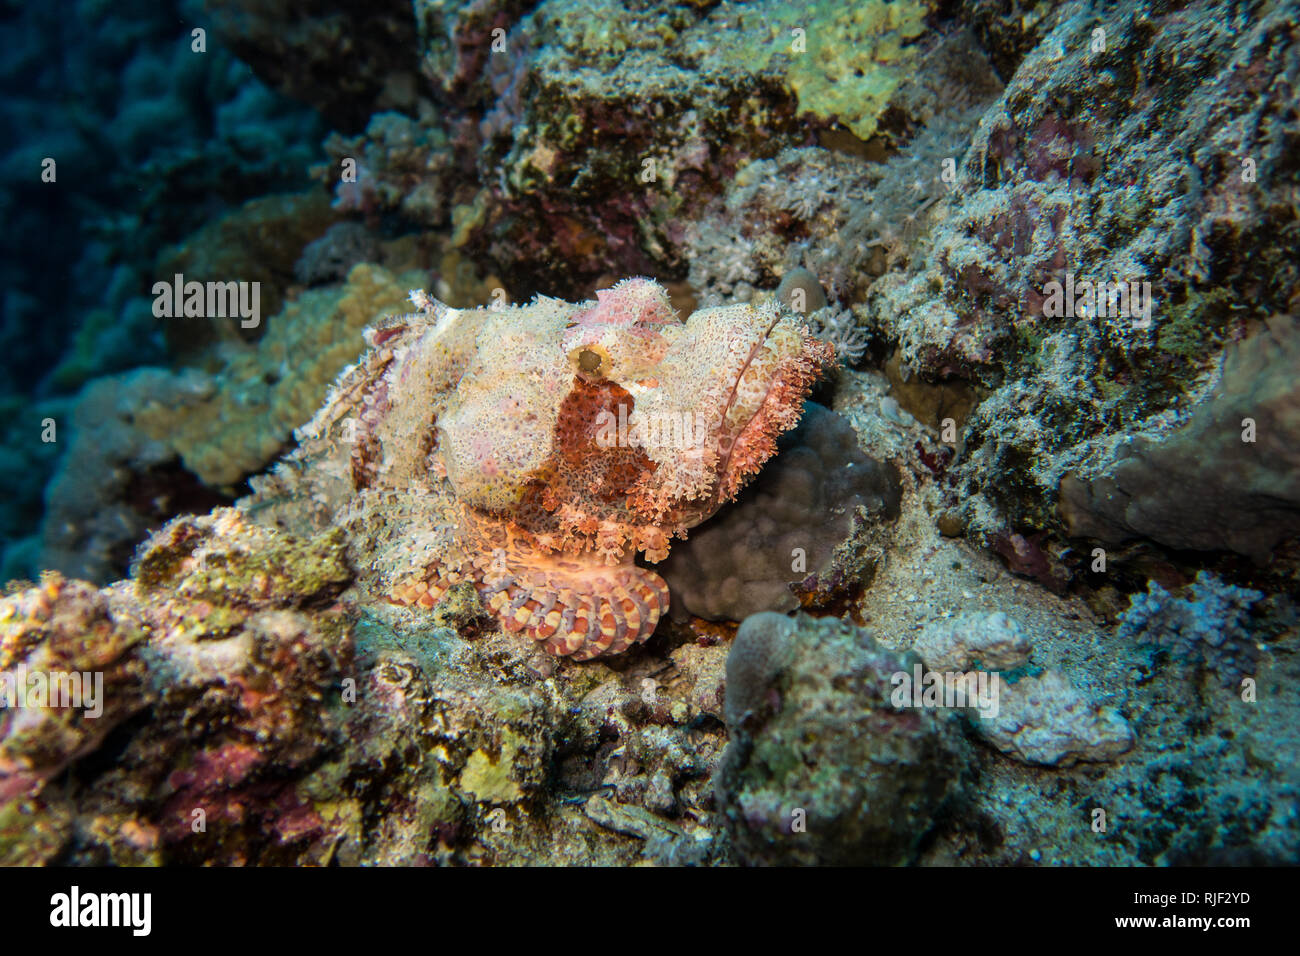 Perfectly camouflaged and disguised stone fish or Skorpion fish waiting for prey in the red Sea in Egypt Stock Photo